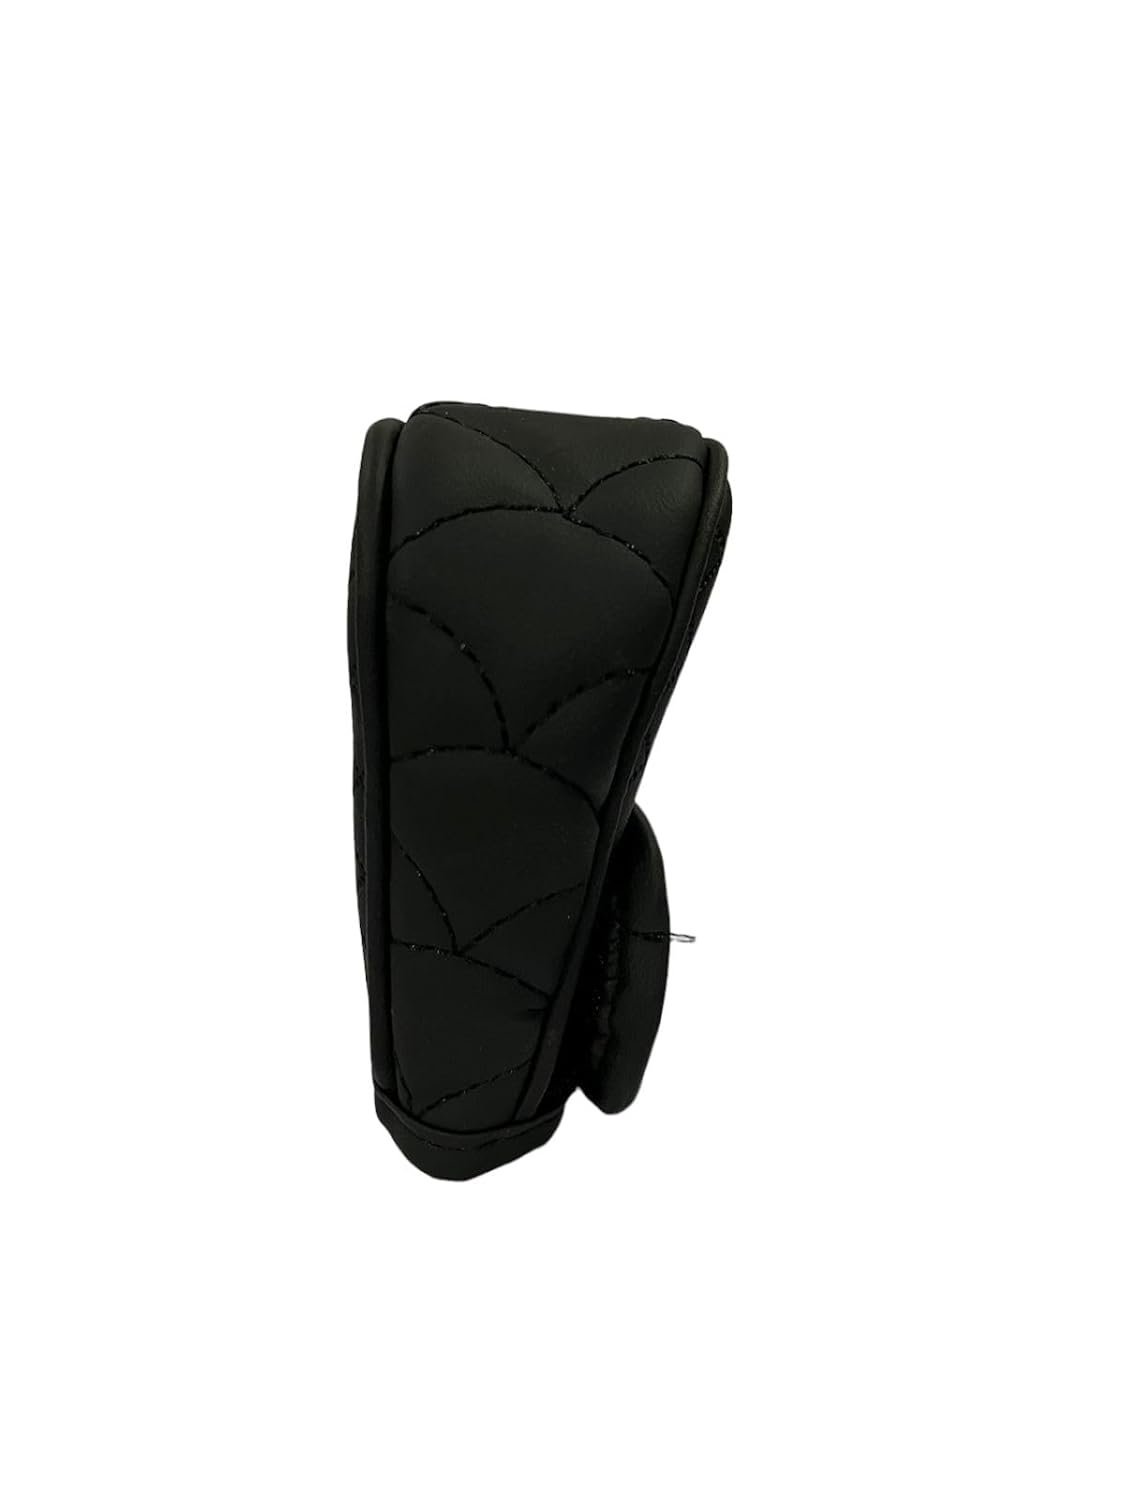 Dust Cover Anti-Slip Zipper Closure, Skid Proof Cover Protection Car Leather Gear Cover(Black) Image 